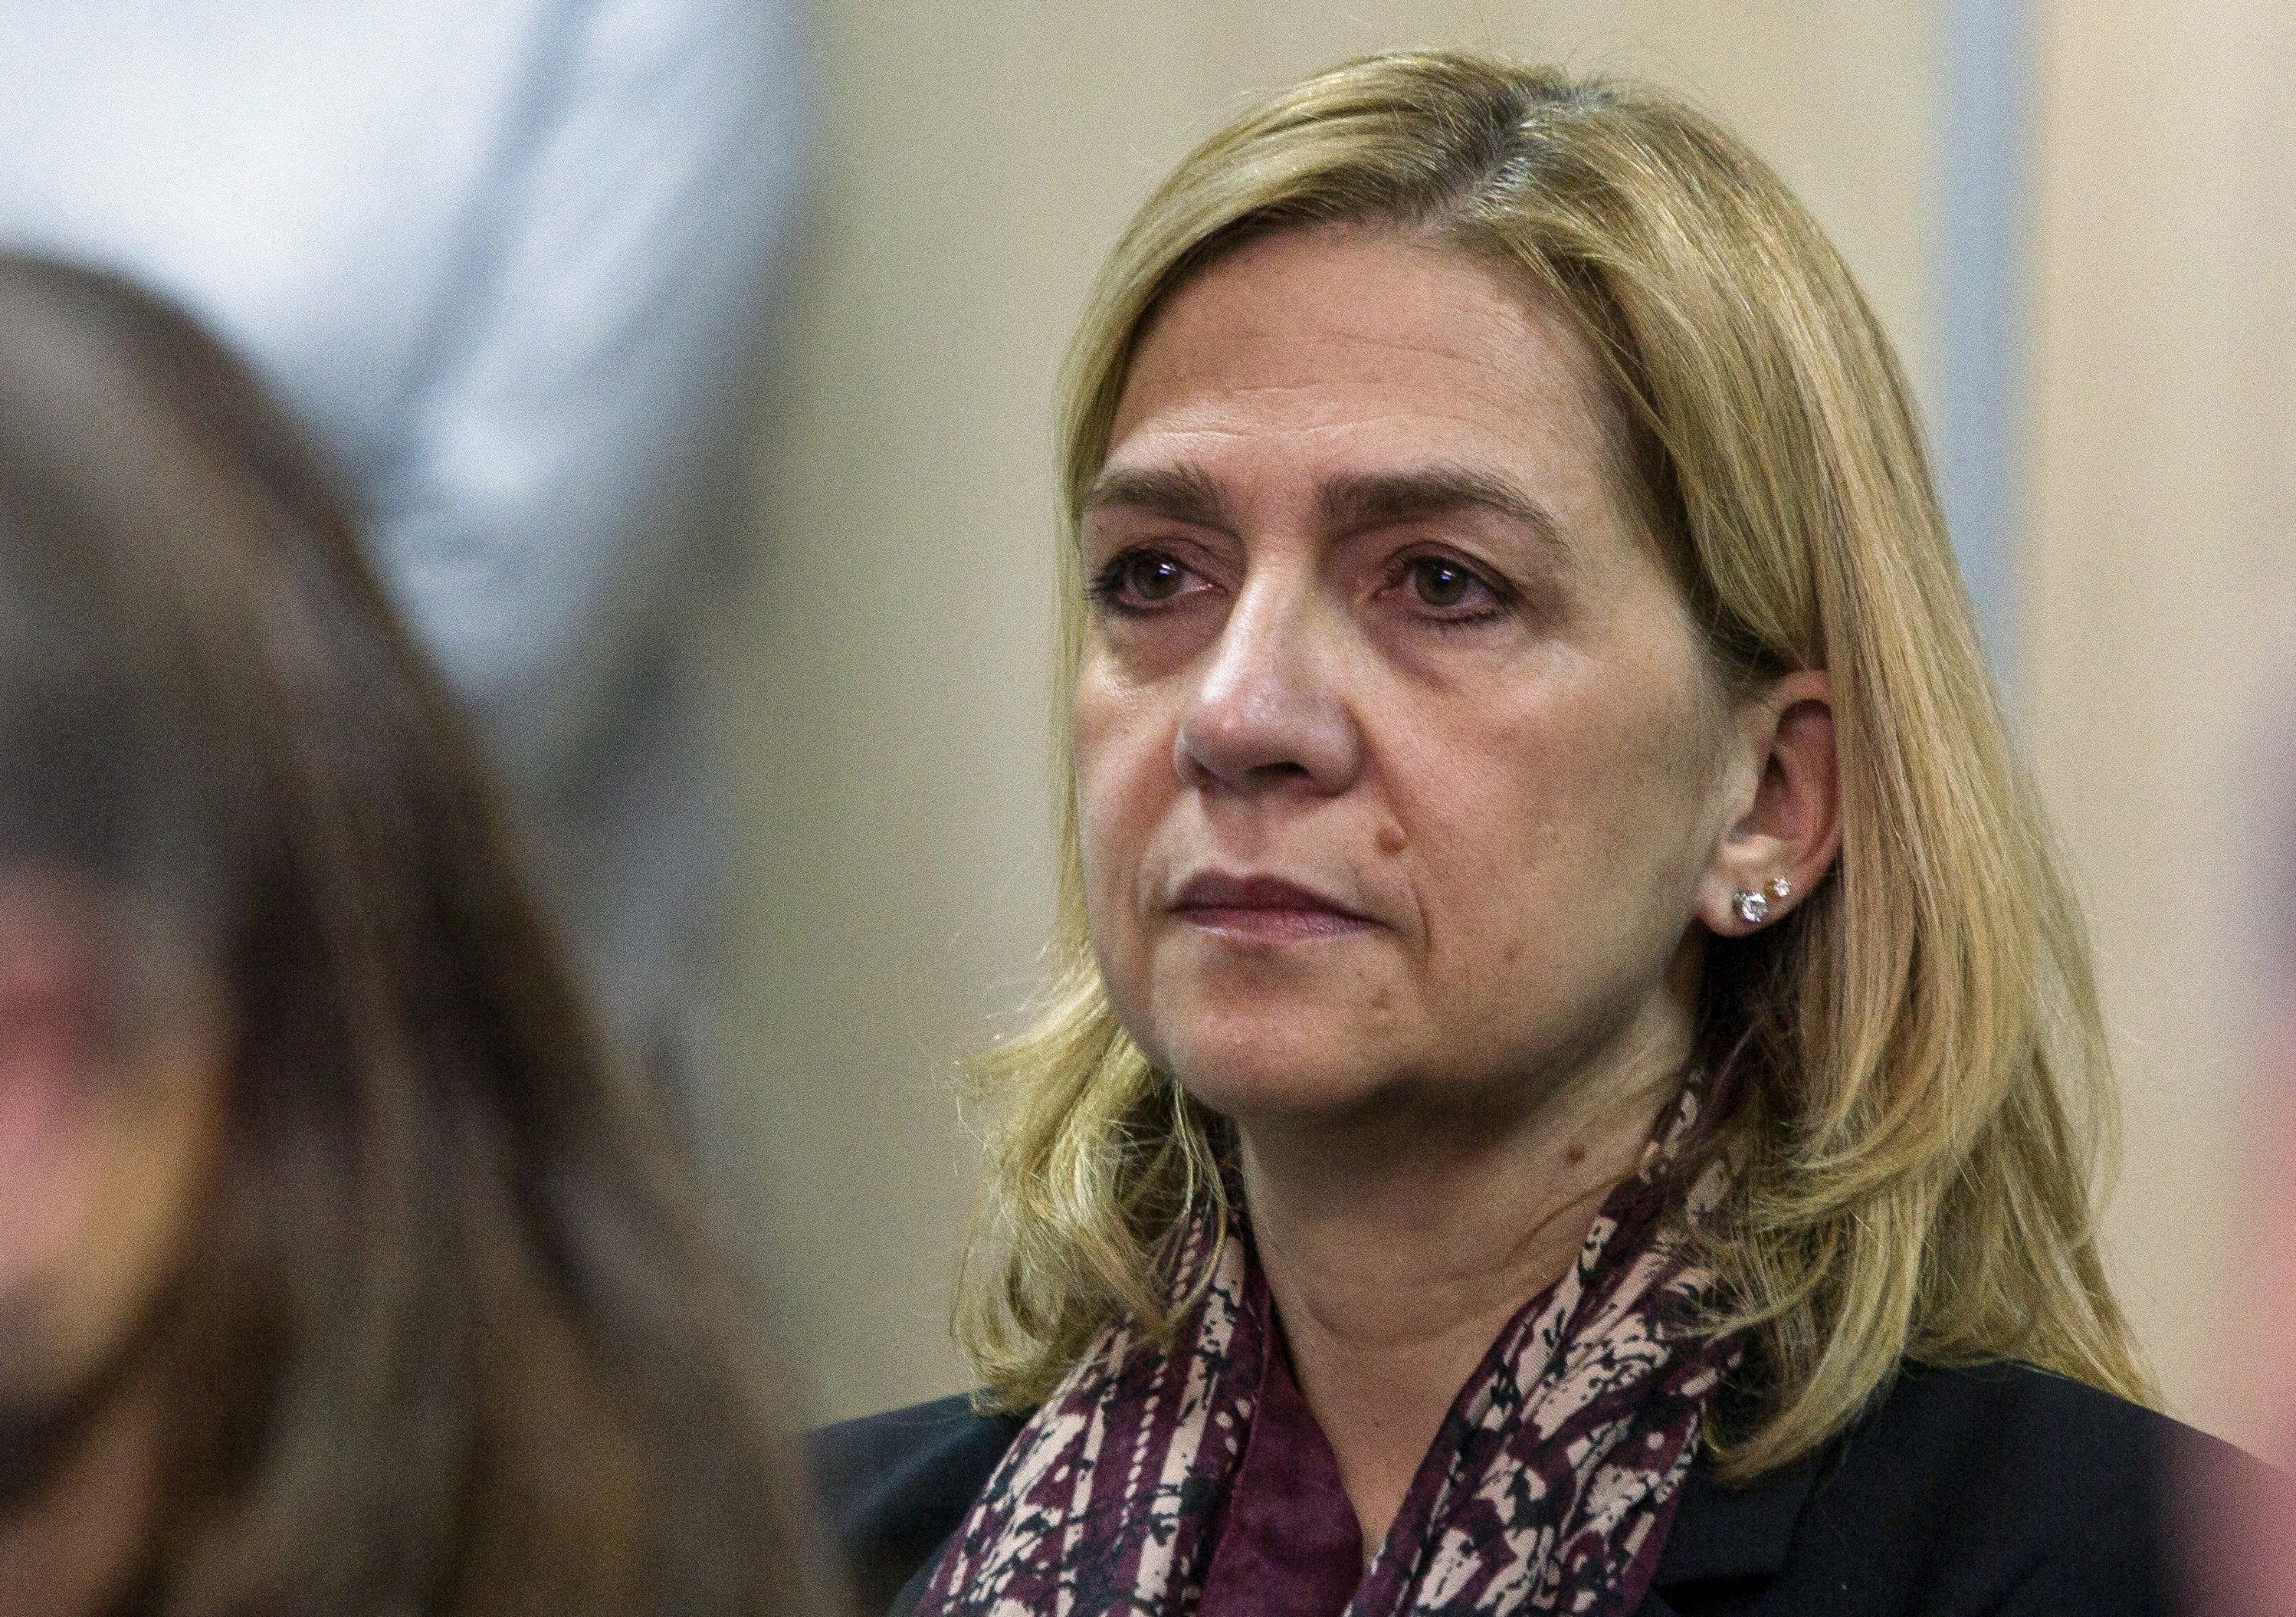 Spain's Princess Cristina sits in court as a long-running investigation into the business affairs of her husband goes to trial, in Palma de Mallorca, Spain